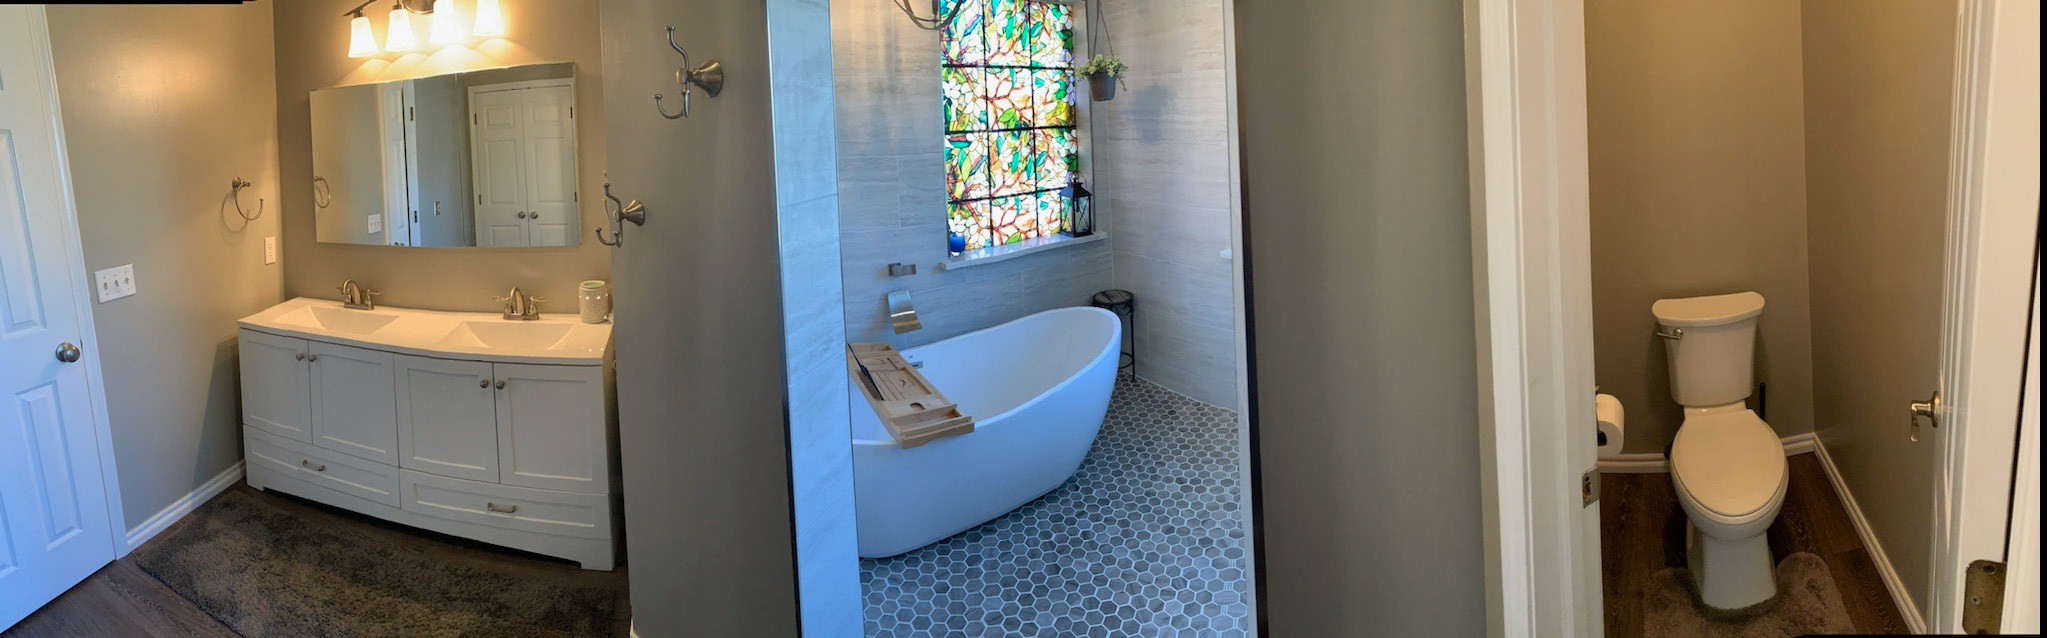 Master Bath with Stunning Feature Window